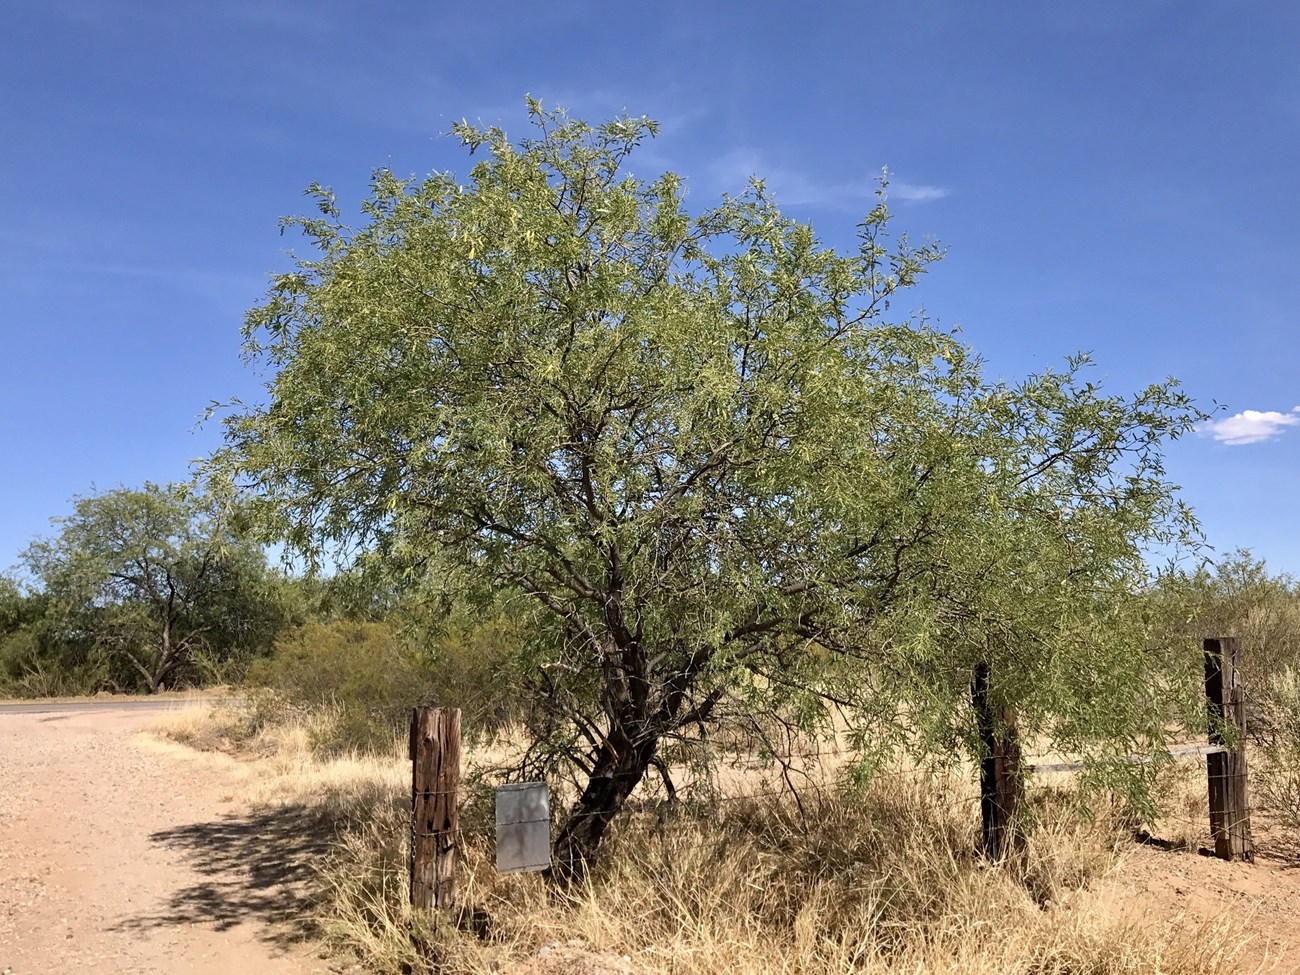 A classic, mature velvet mesquite tree growing along a barbed wire fence. It is loaded with healthy, green leaves.